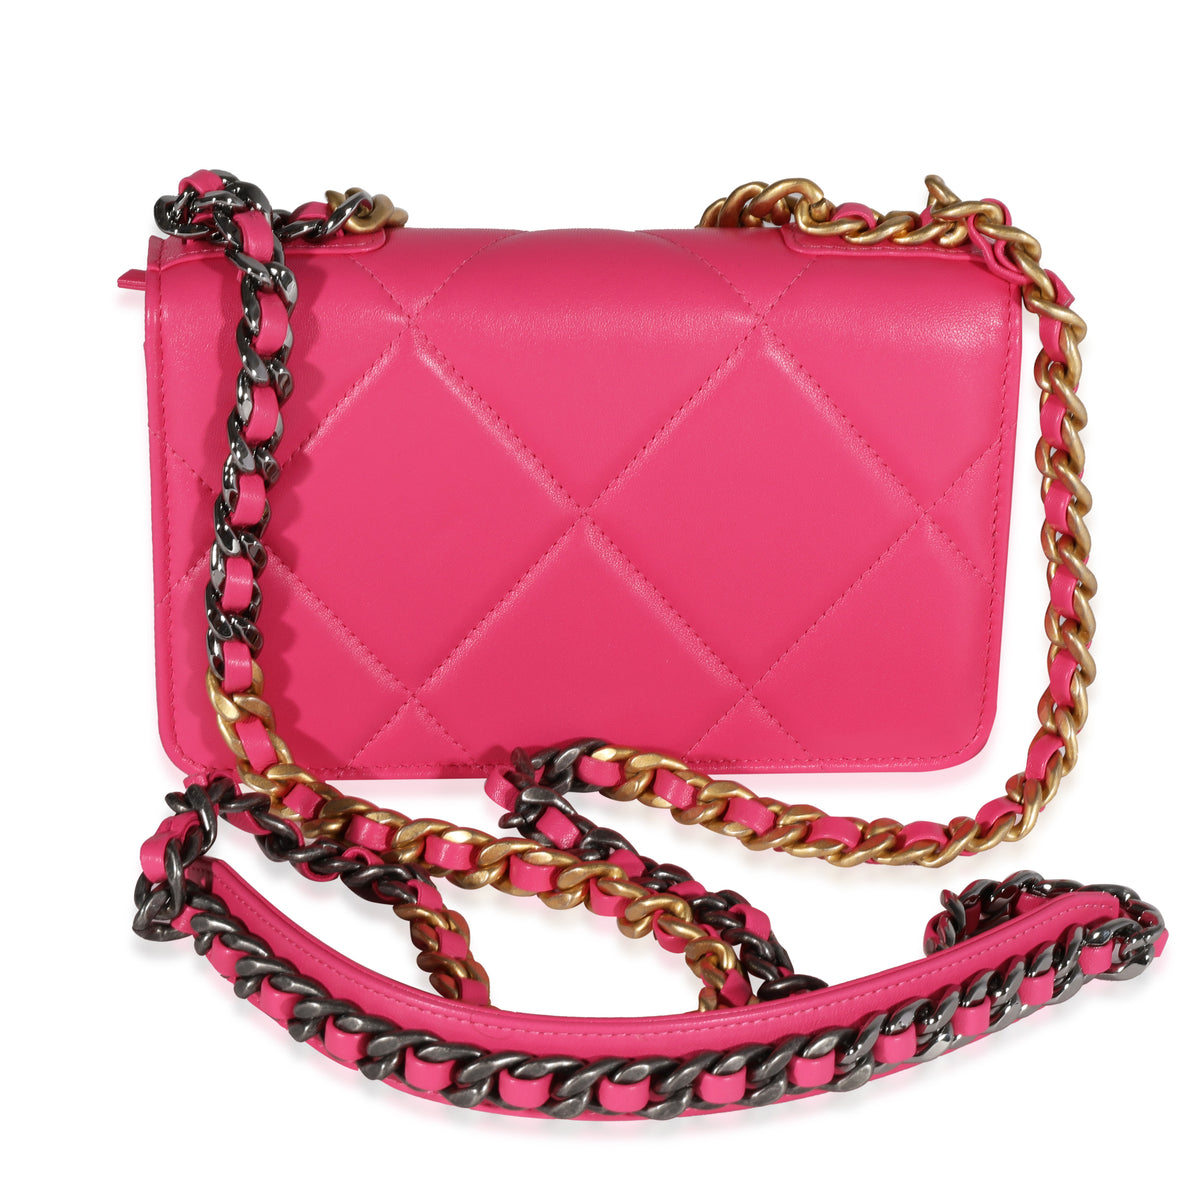 Chanel Hot Pink Quilted Lambskin Chanel 19 Wallet On Chain, myGemma